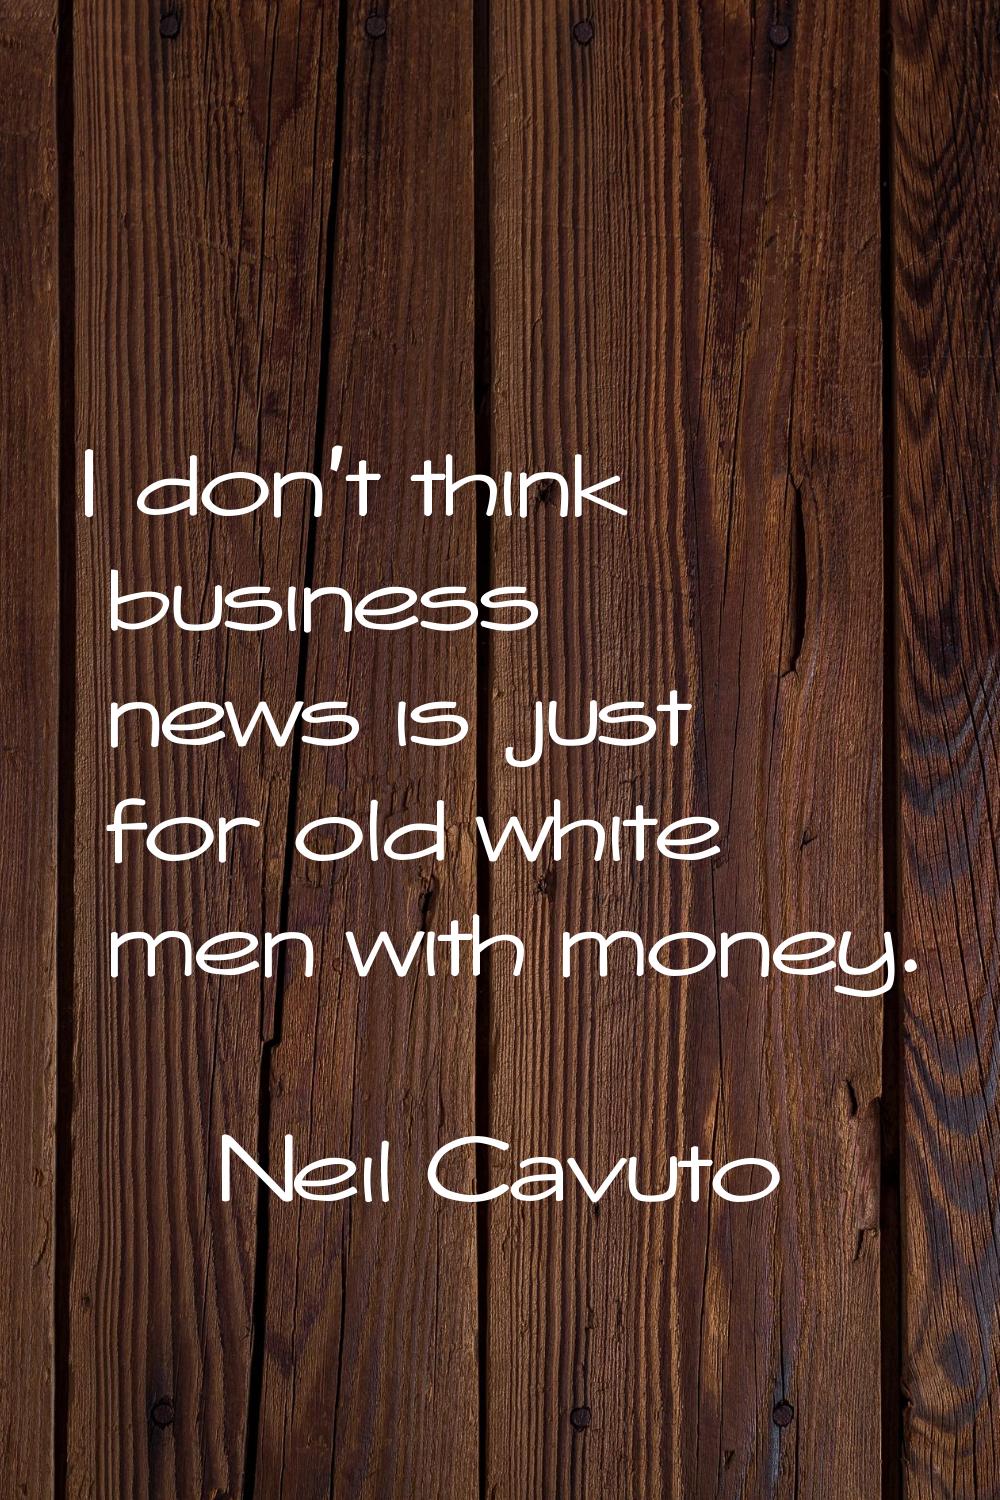 I don't think business news is just for old white men with money.